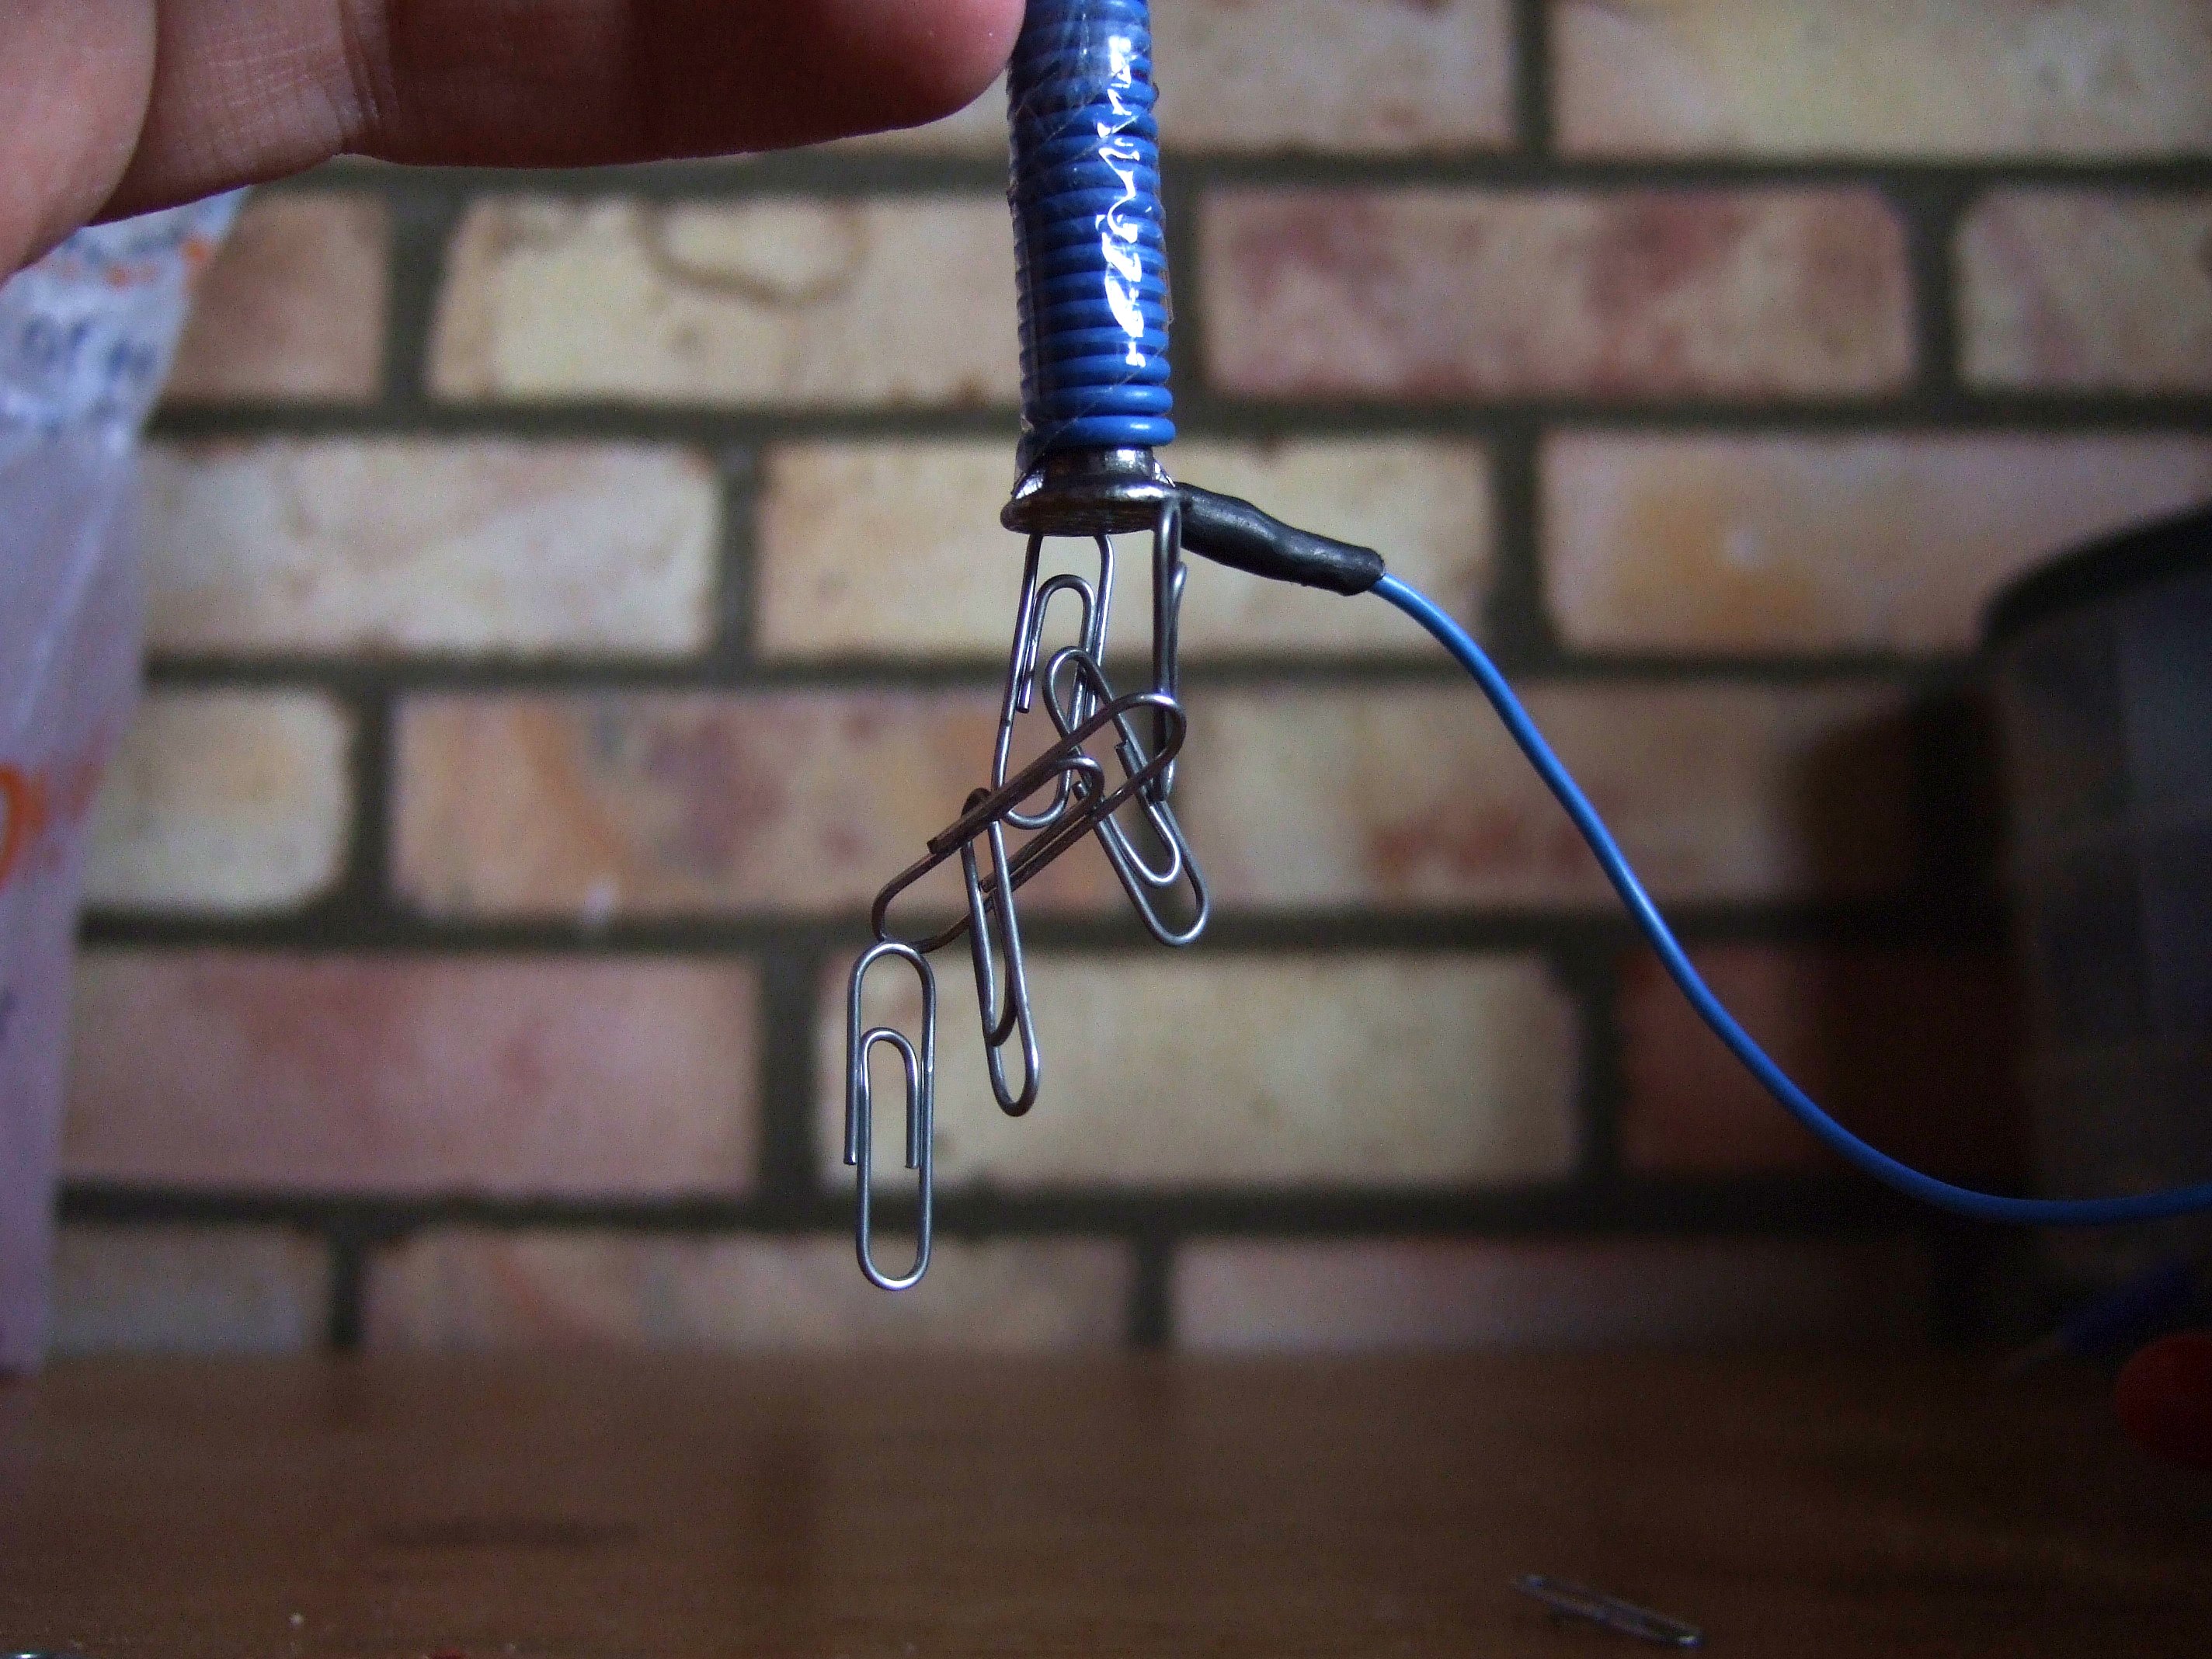 Make your own Electromagnet